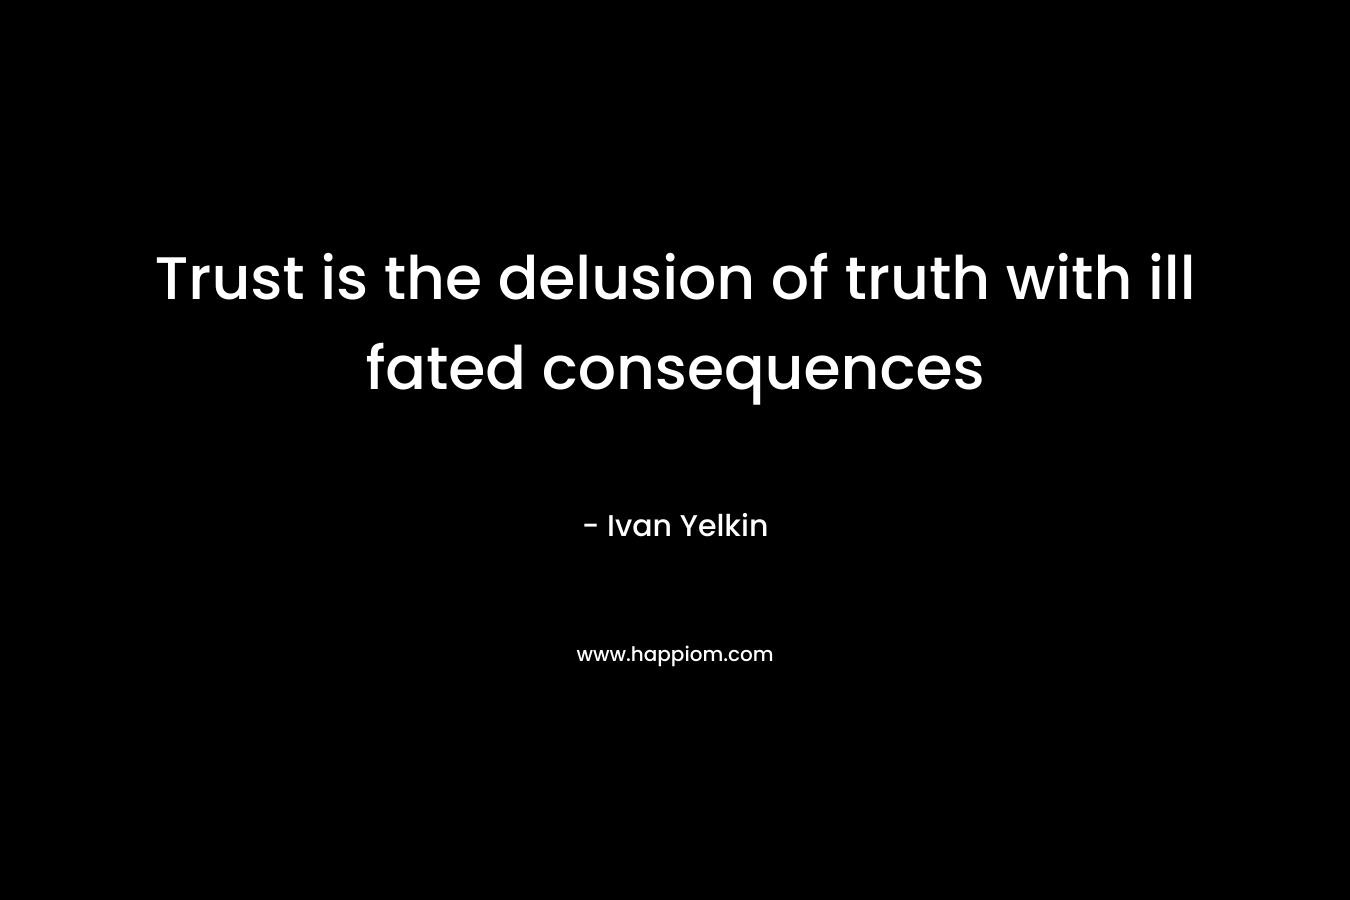 Trust is the delusion of truth with ill fated consequences